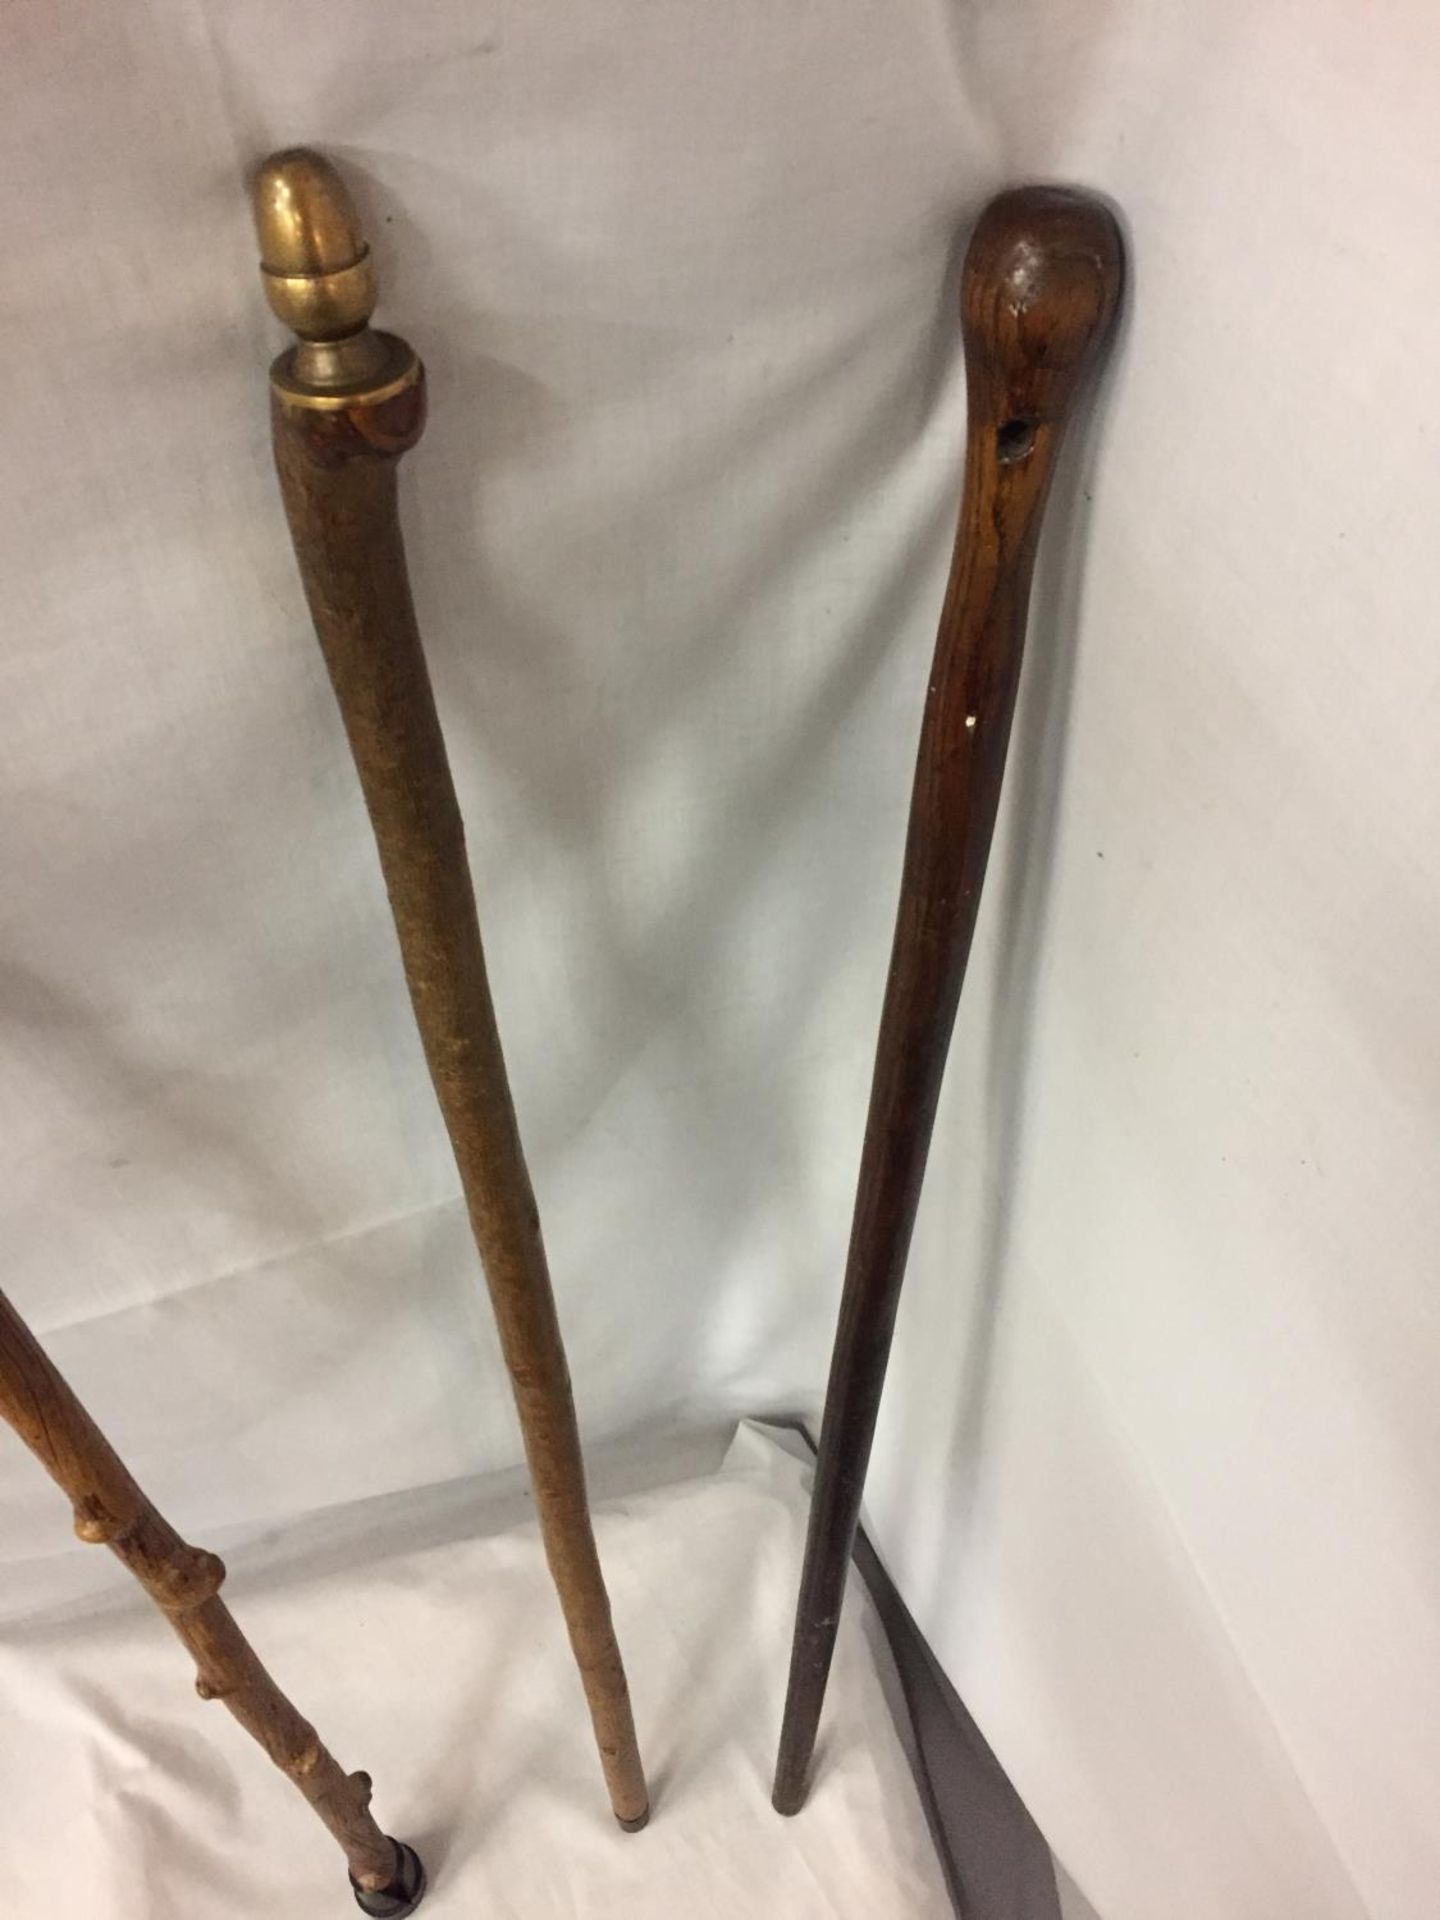 THREE WOODEN WALKING STICKS, ONE WITH DECORATIVE BRASS ACORN TOP - Image 4 of 4